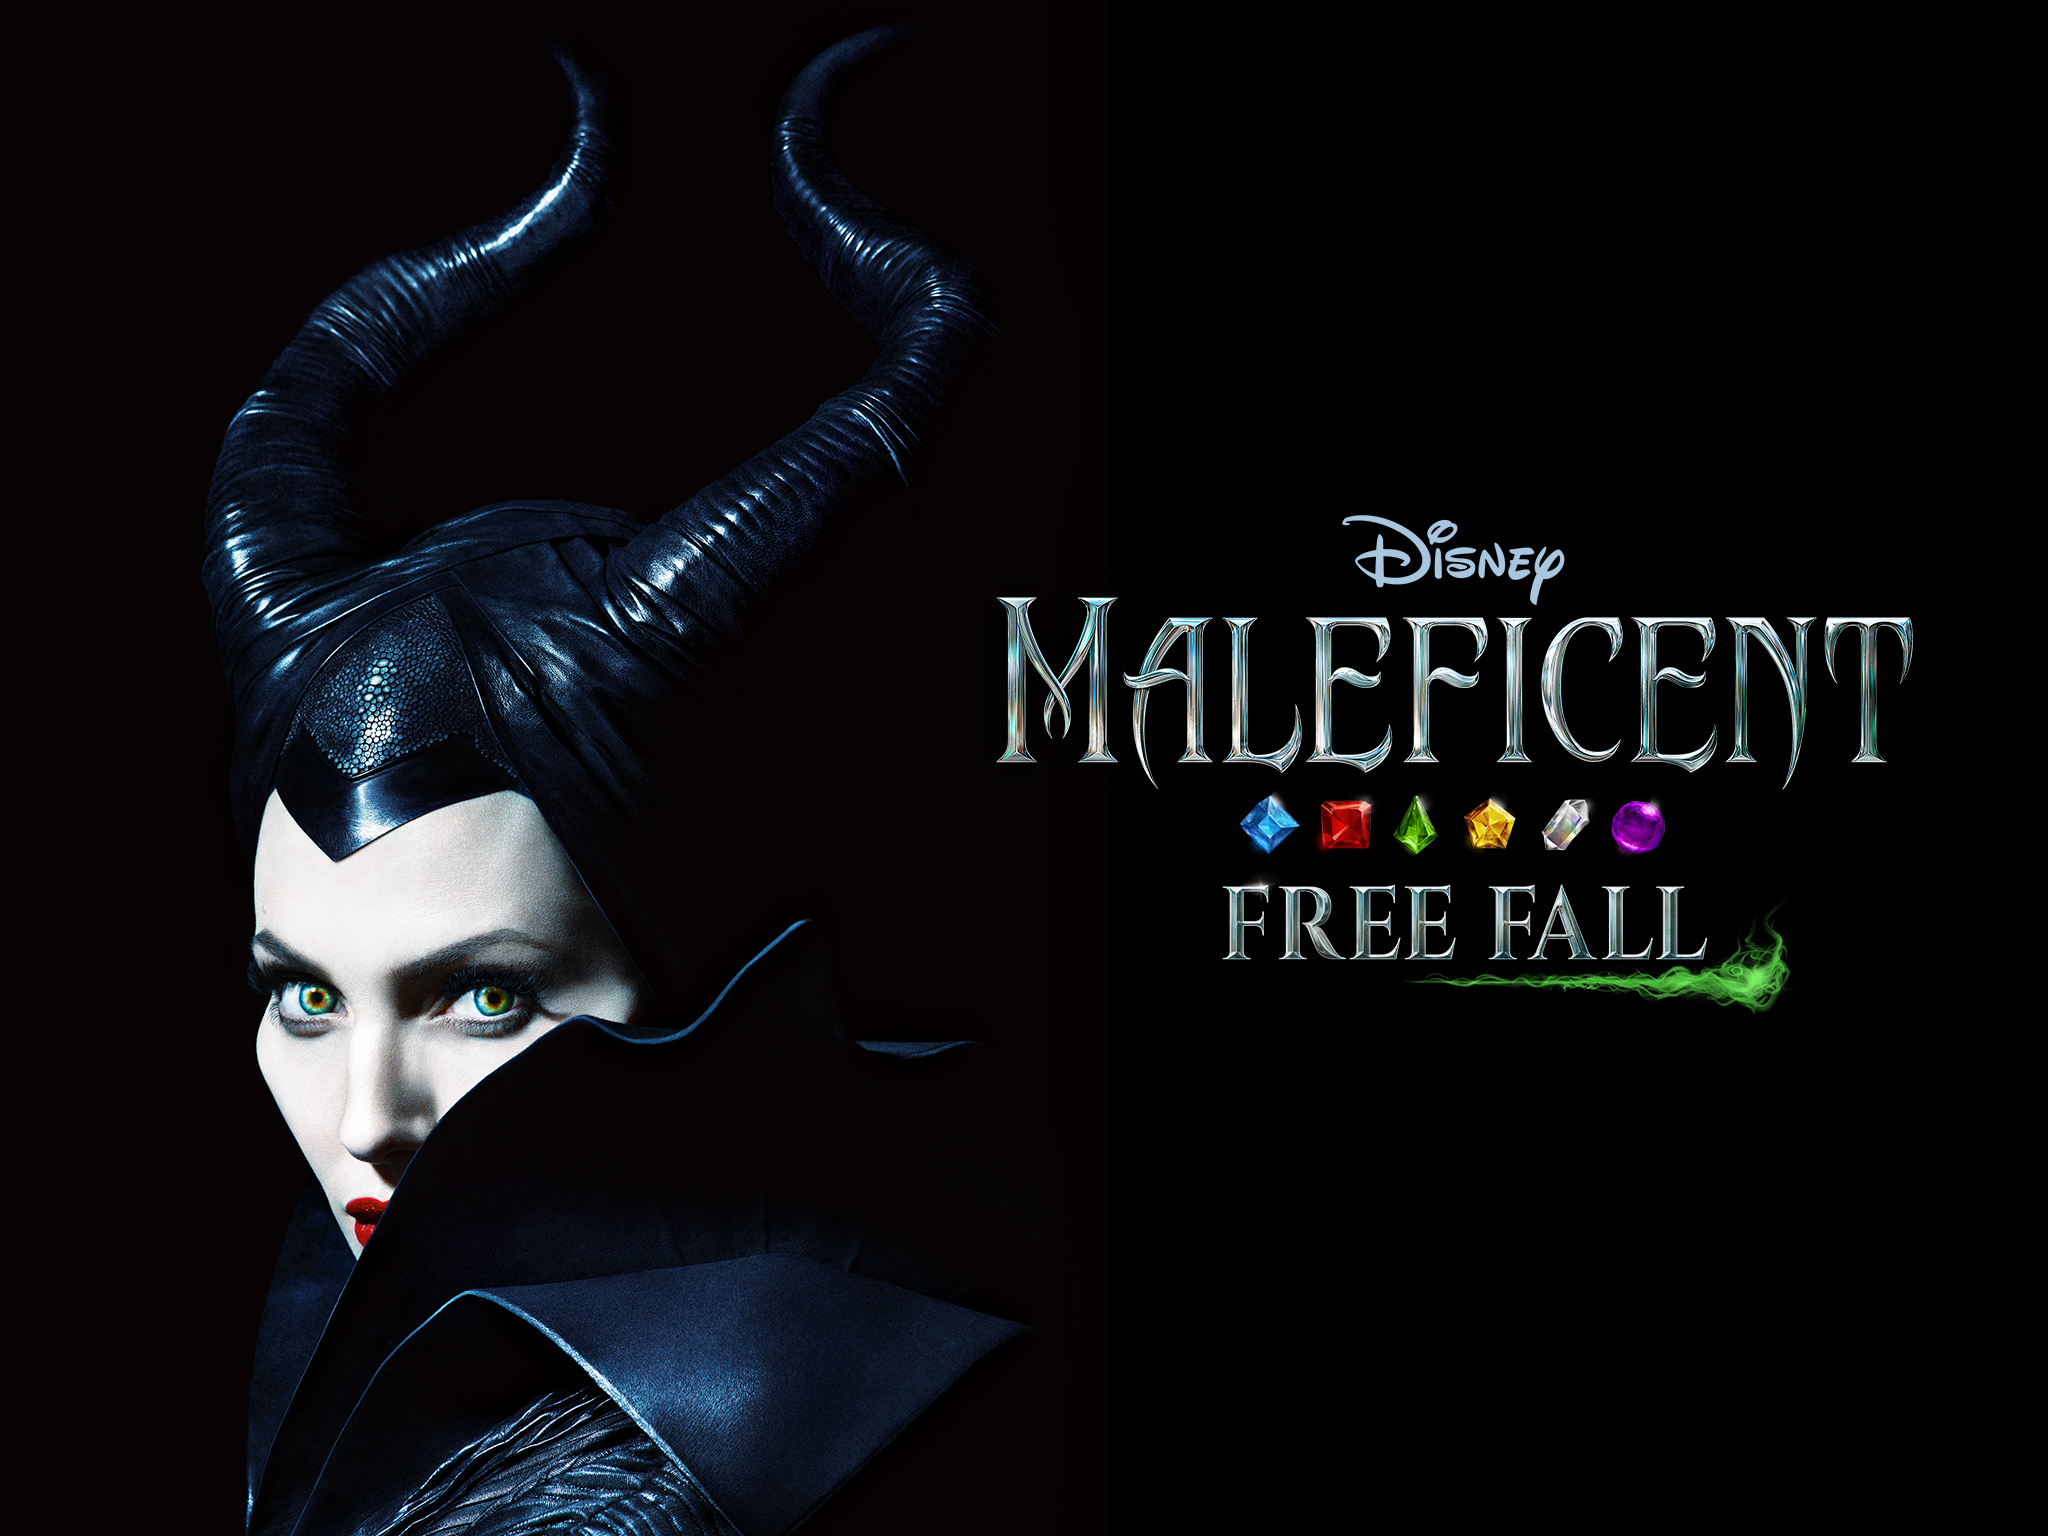 Magically Match-3 in “Maleficent Free Fall”